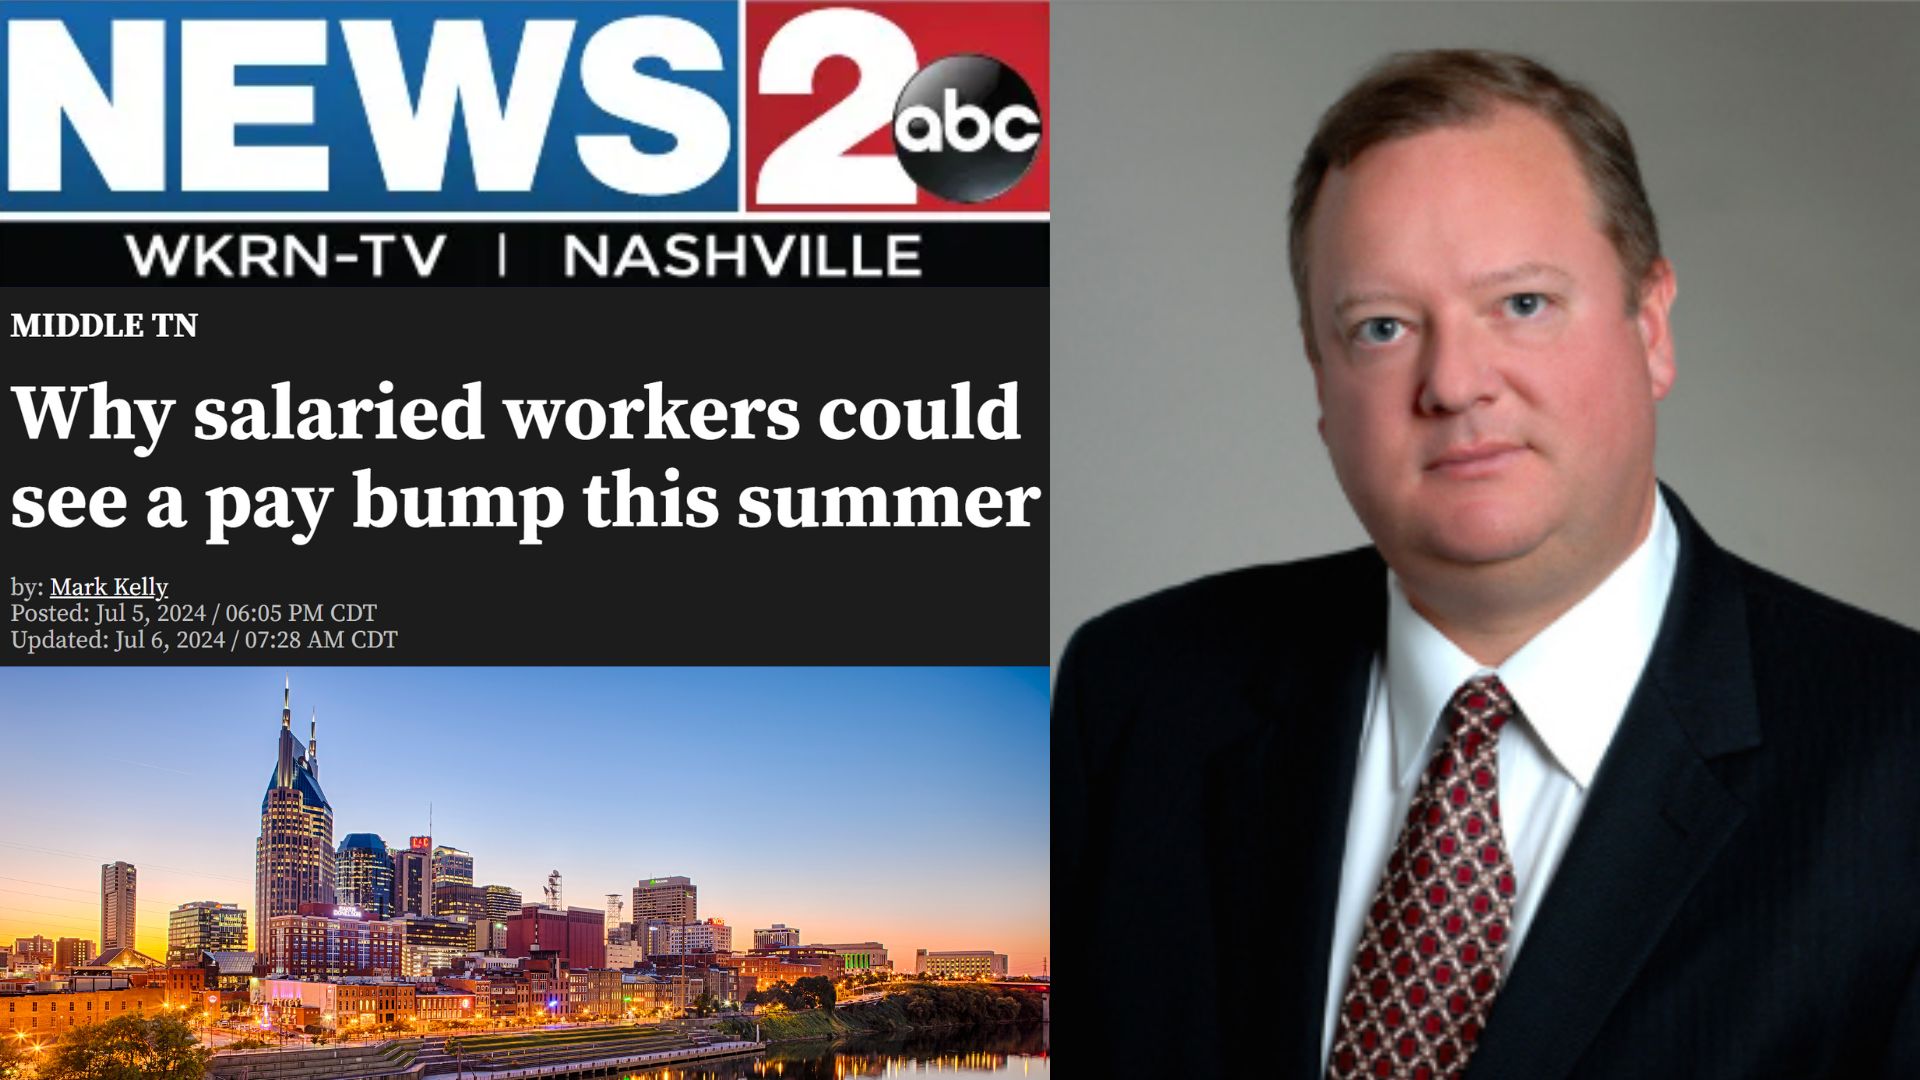 ICYMI: Todd Cole on WKRN News 2 discussing salaried workers to qualify for overtime pay